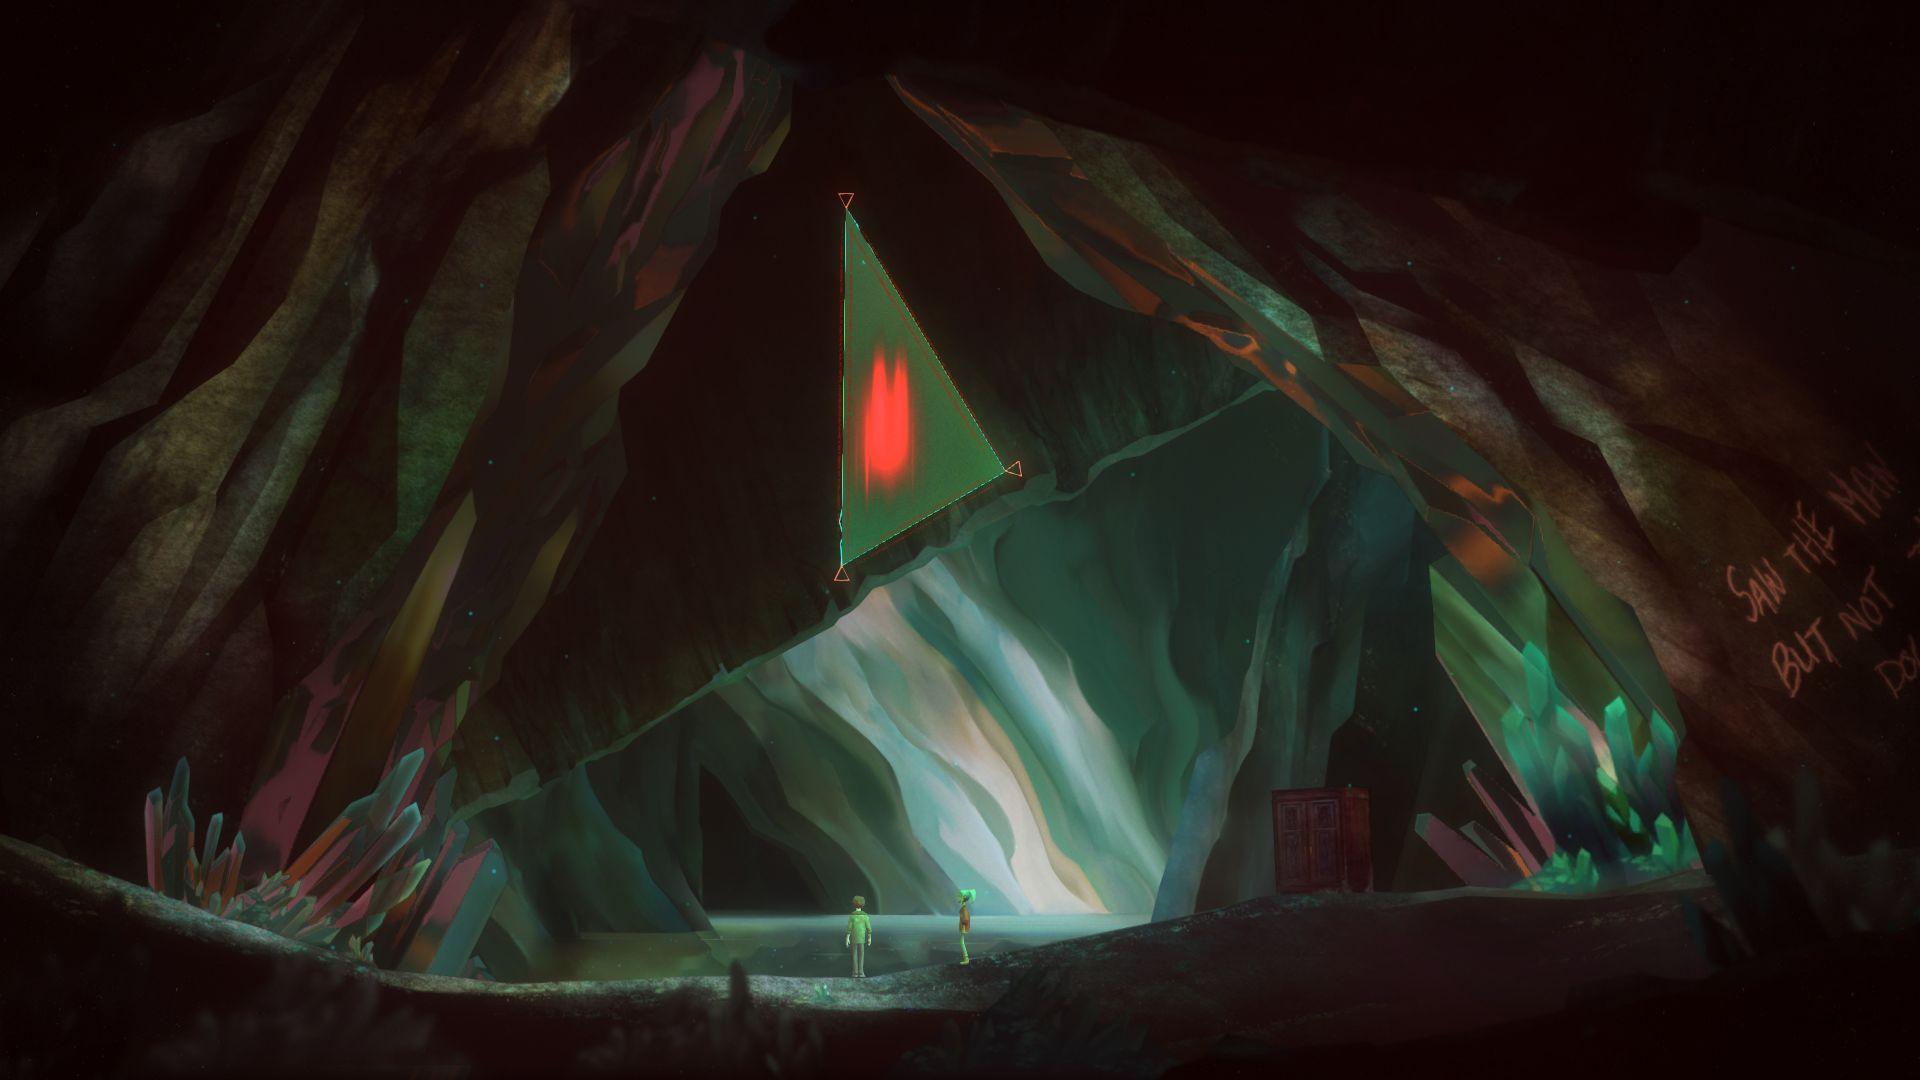 oxenfree game on 2560x1440